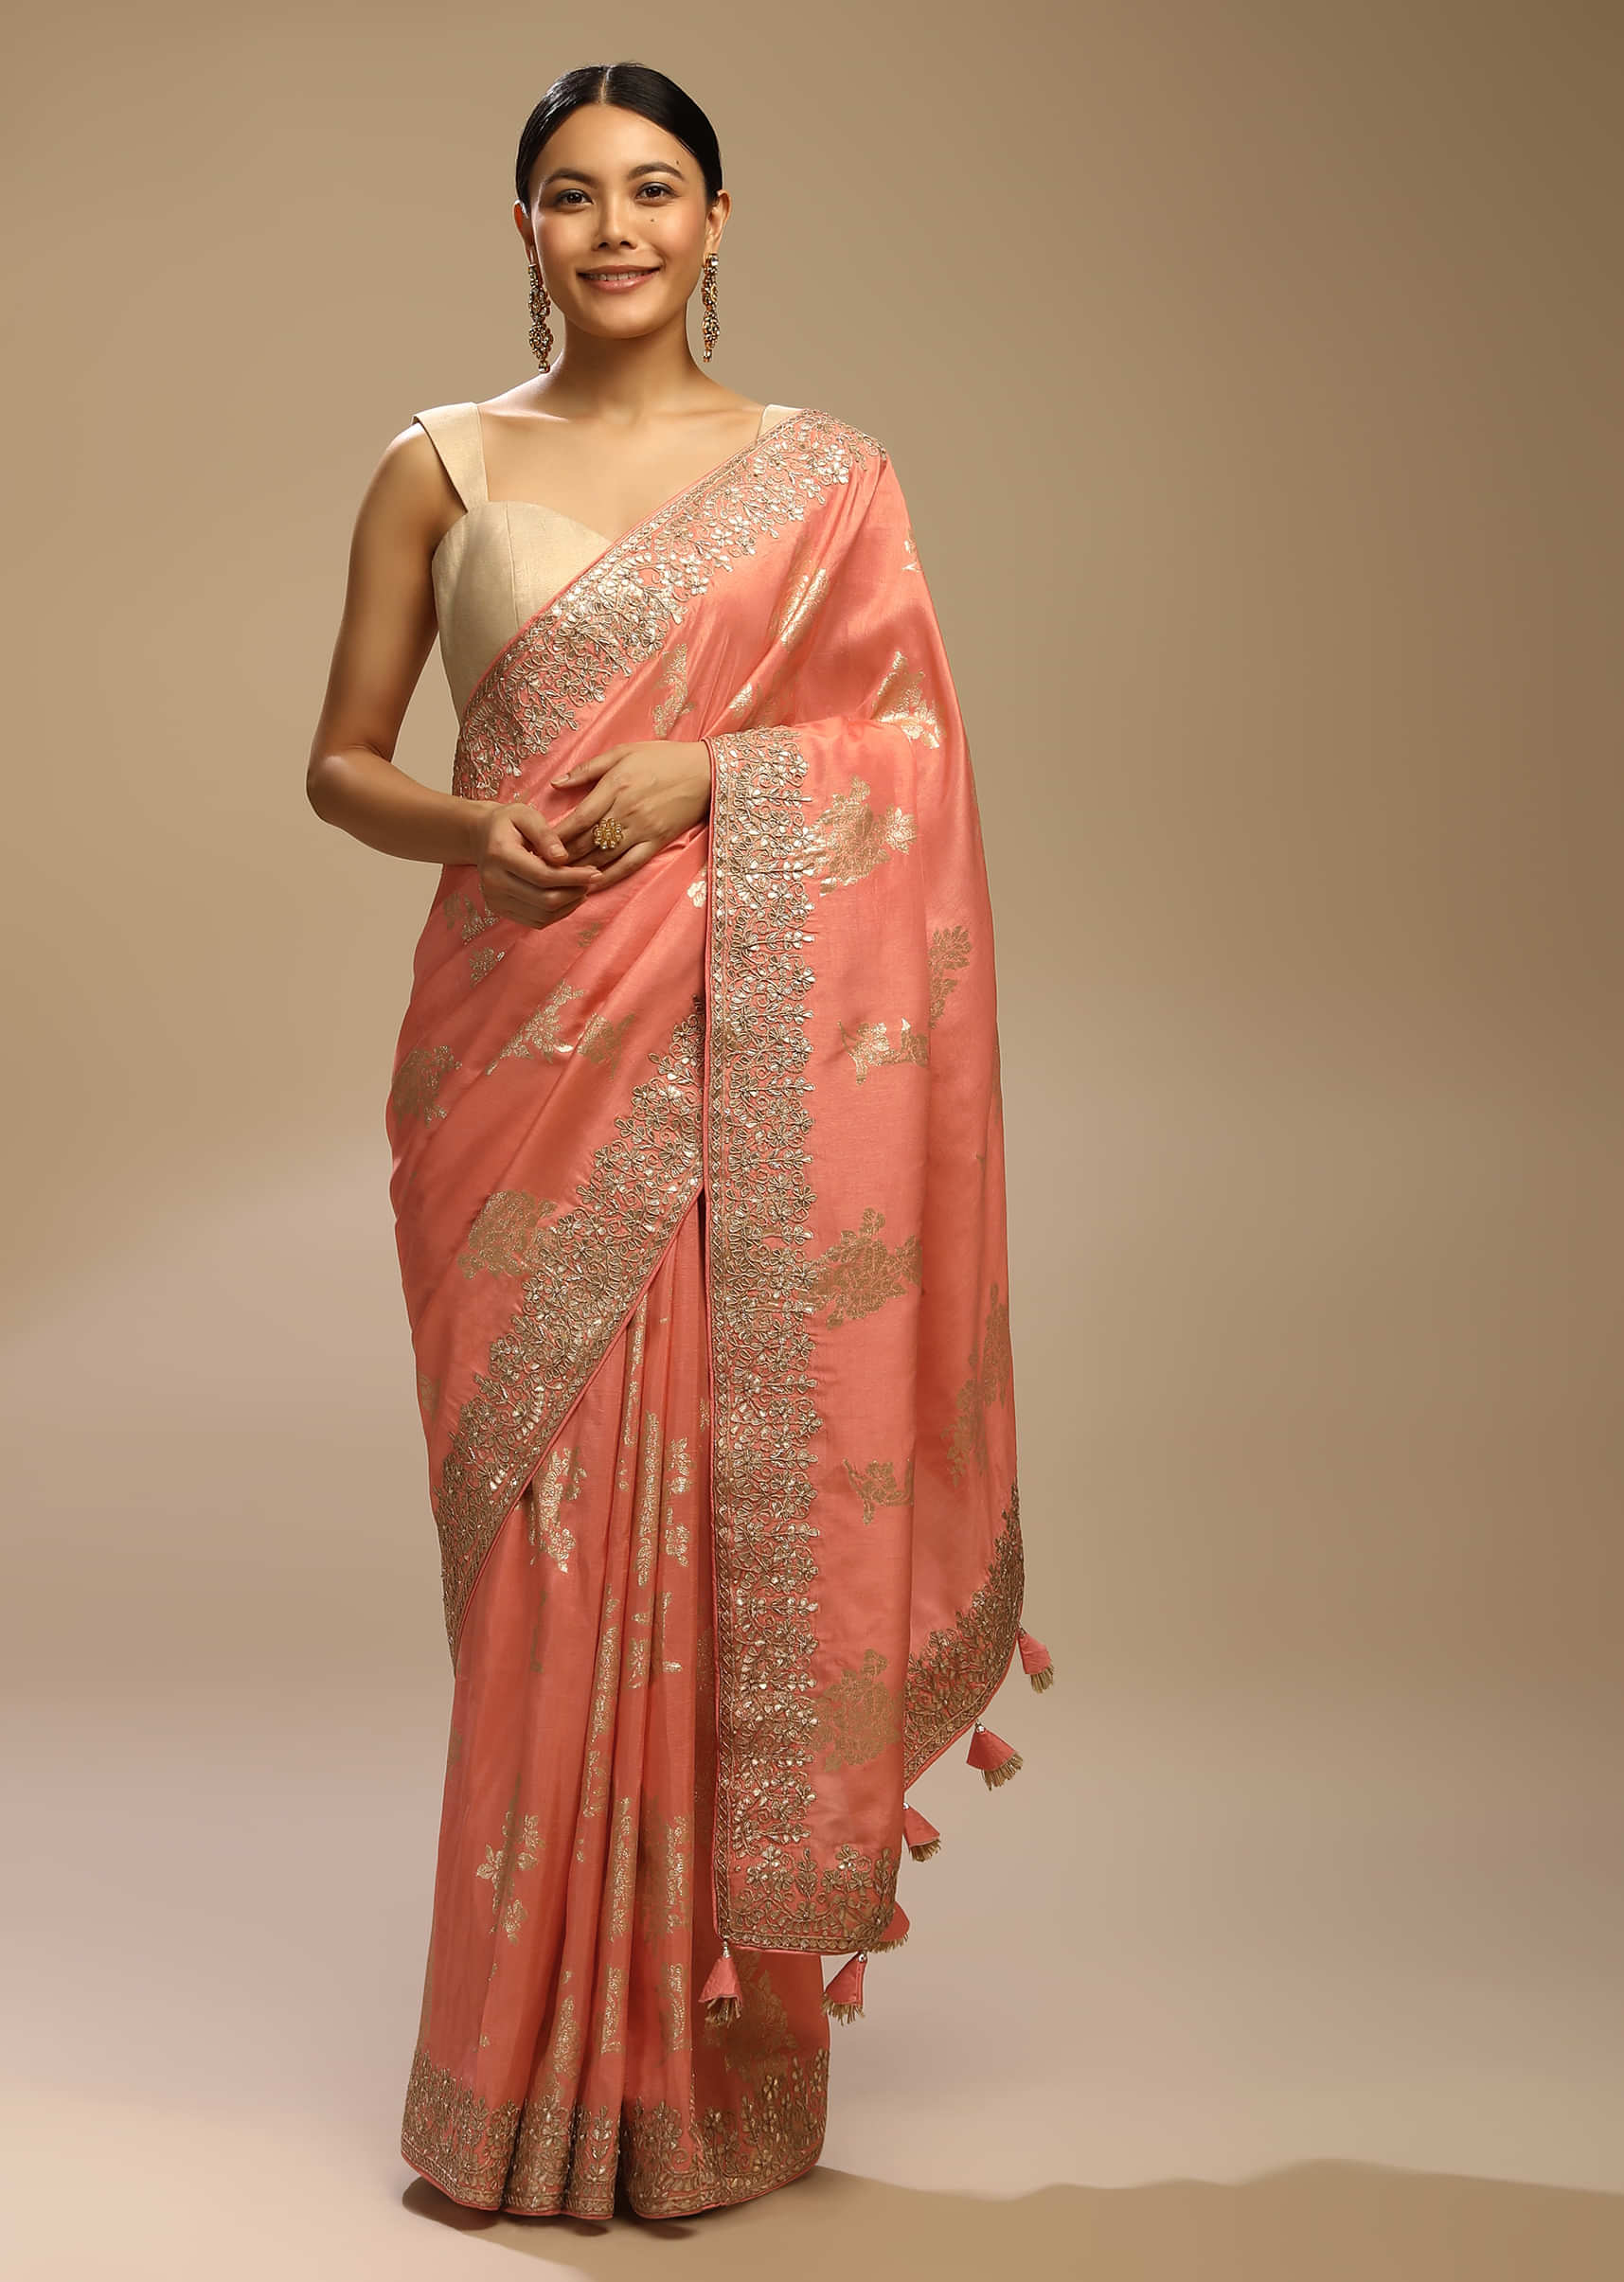 Peach Amber Saree In Dupion Silk With Woven Floral Motifs And Gotta Embroidered Floral Border